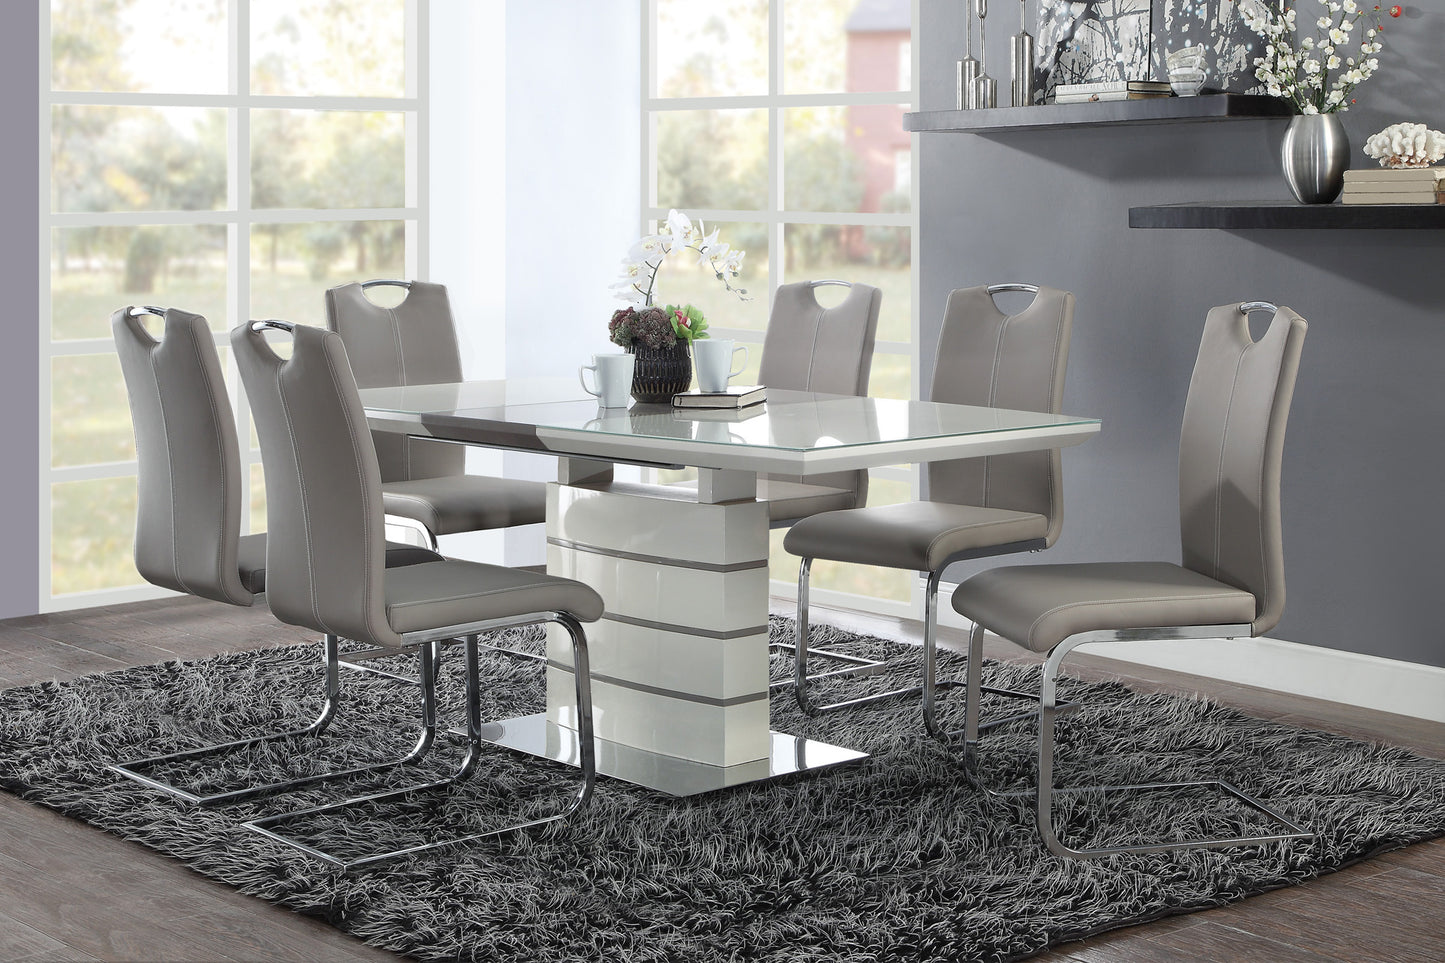 Glissand 5PC Dining Set- Table & 4 Chairs WHITE/GREY/TAUPE only